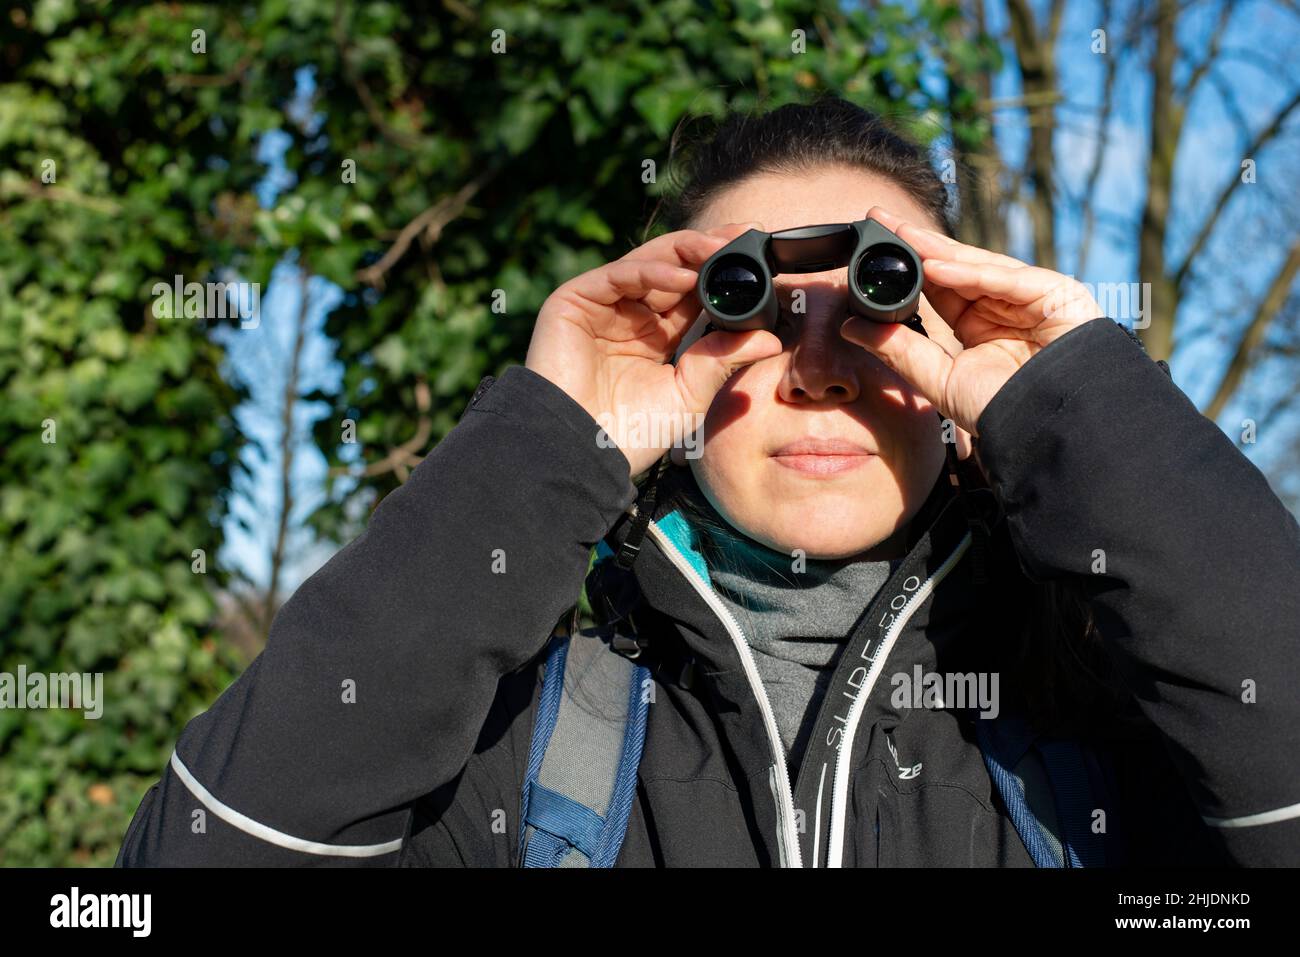 Person birdwatching with binoculars on a cold sunny day Stock Photo